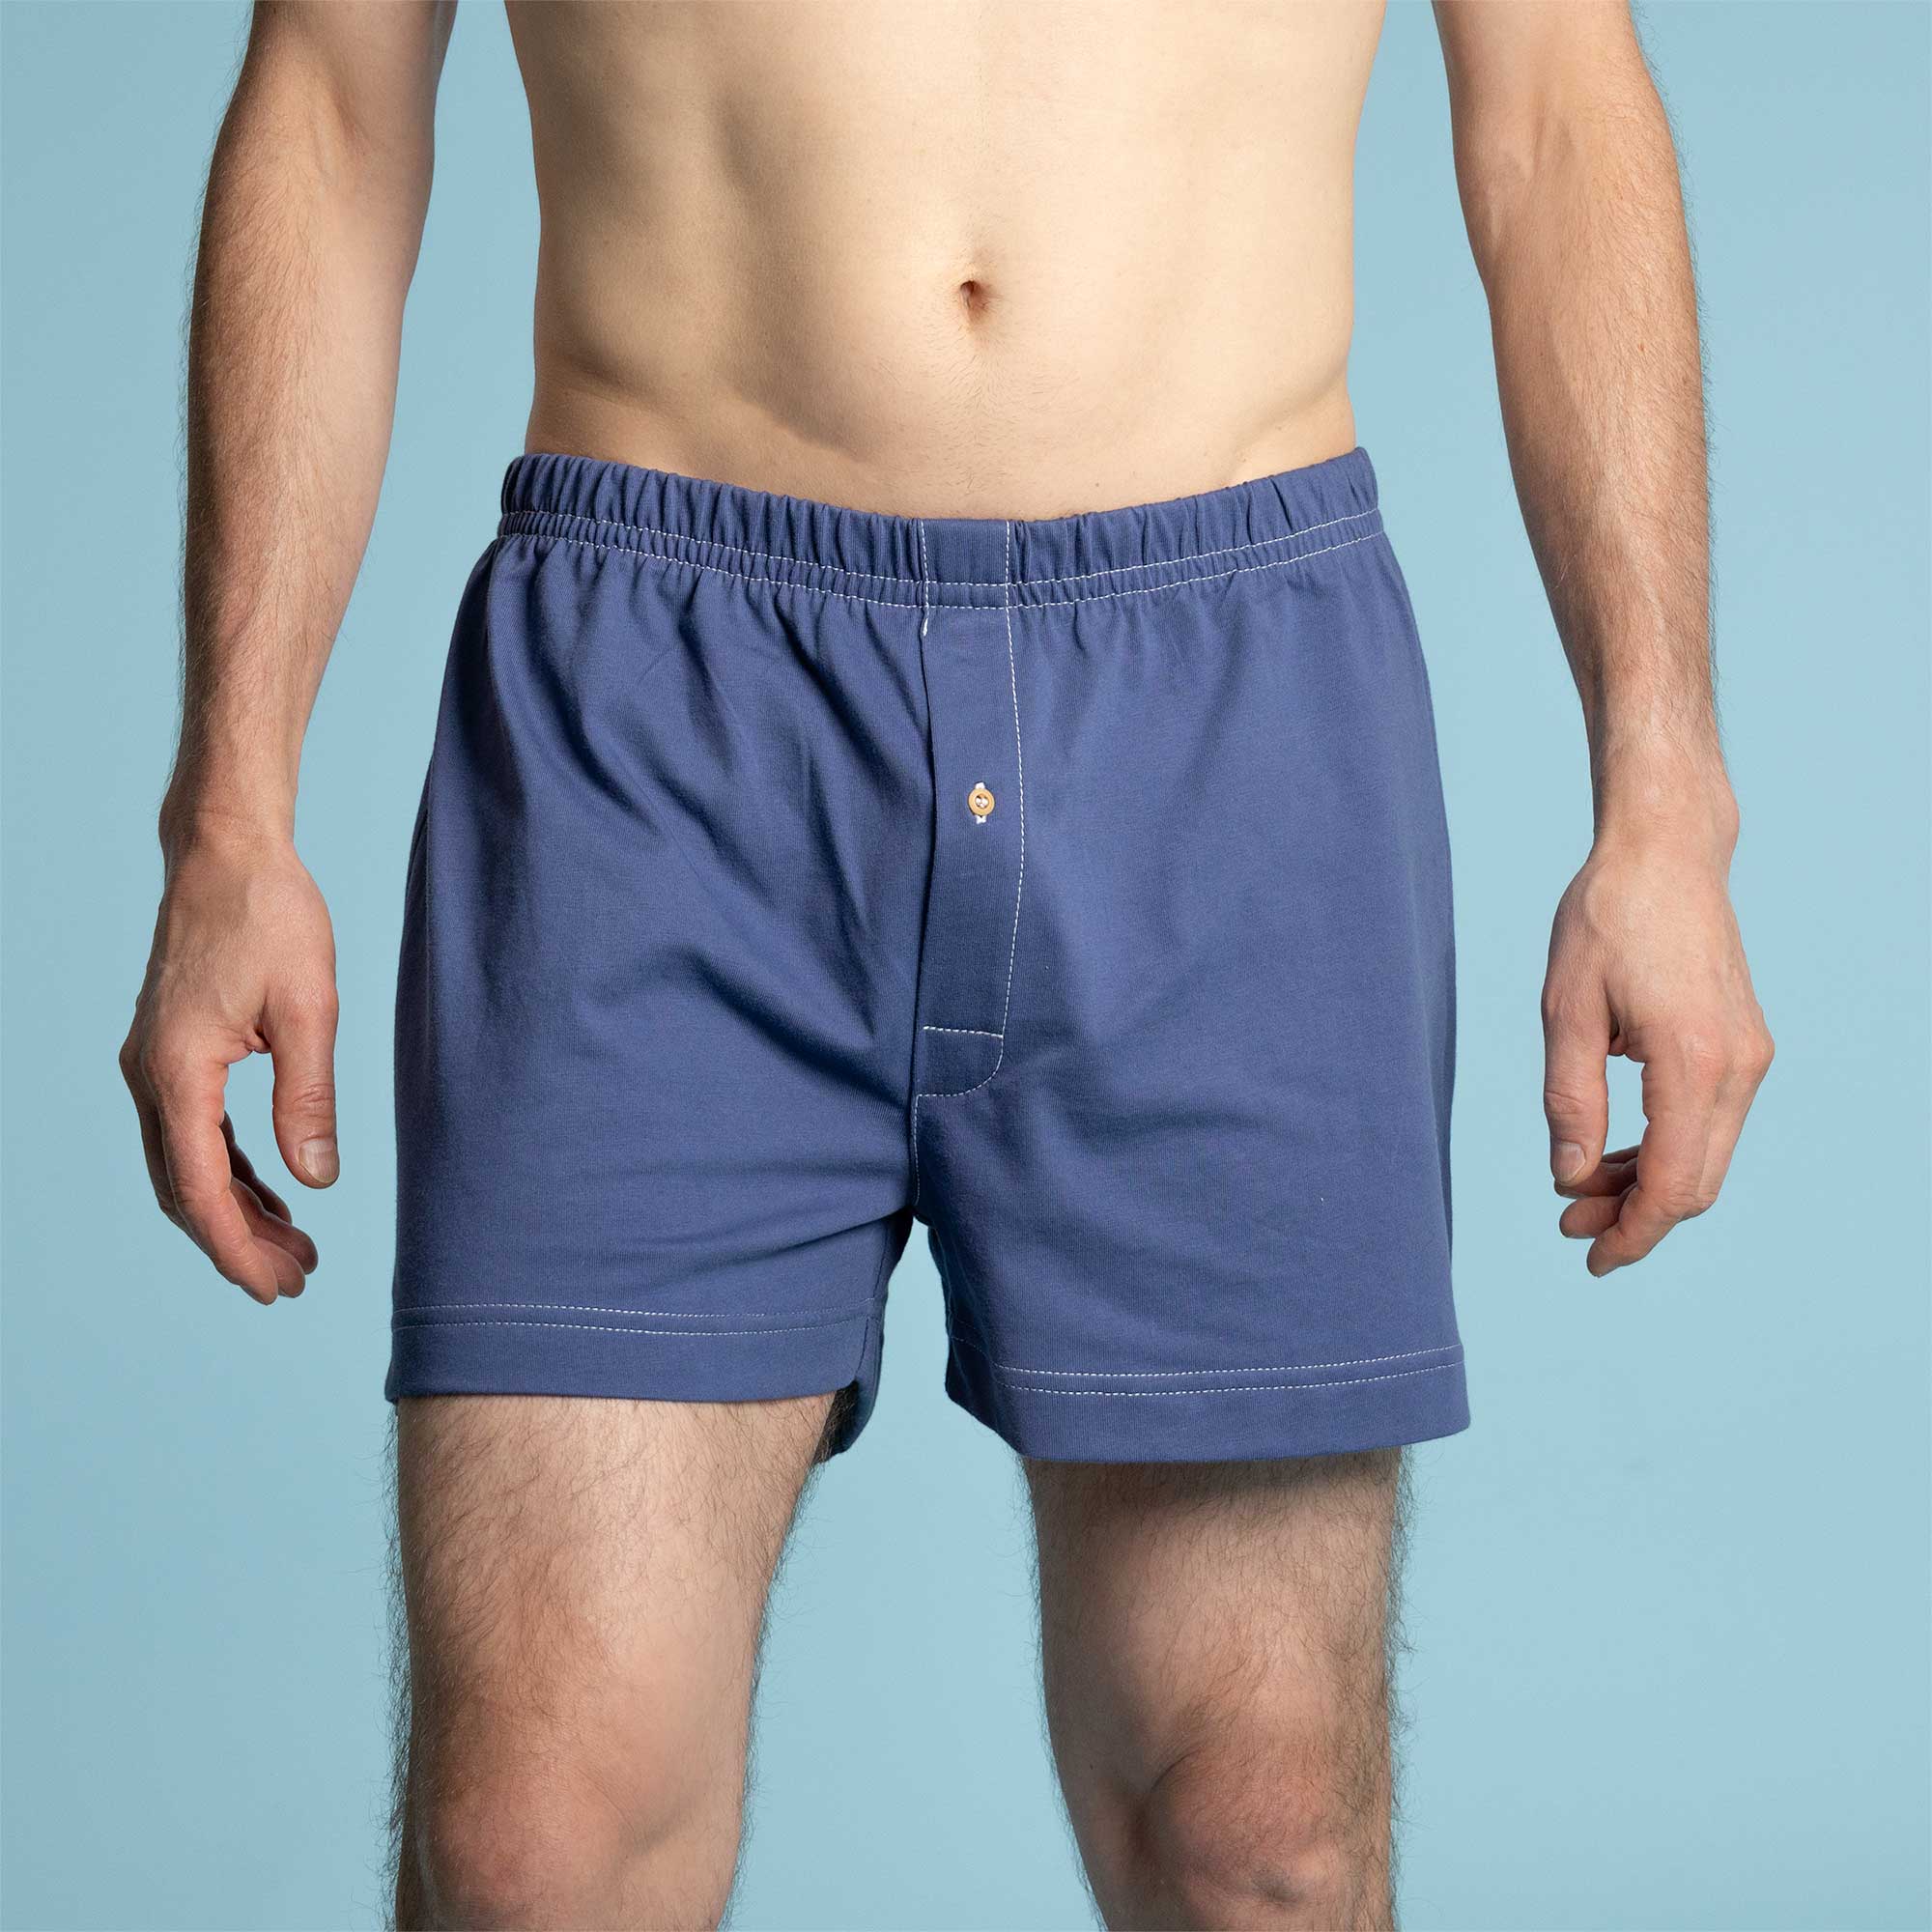 Jersey Knit Boxer Briefs for Men